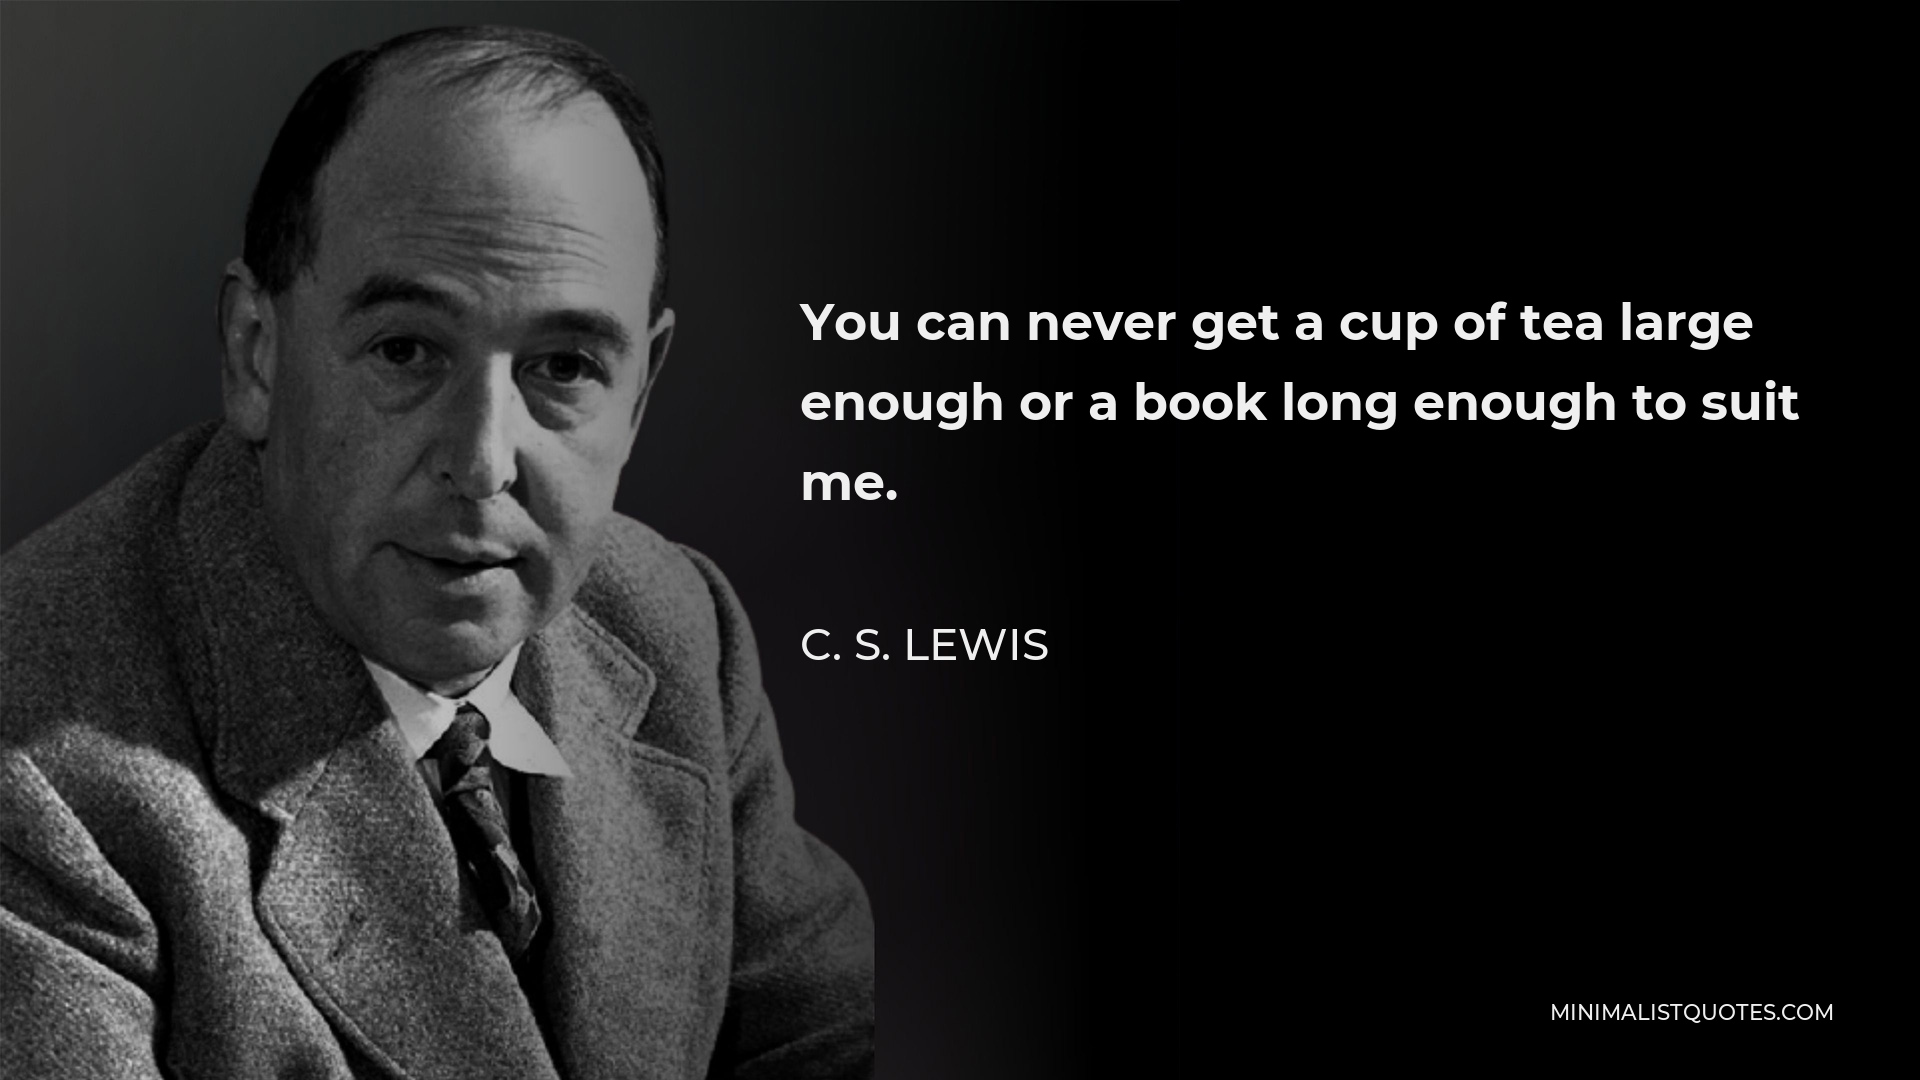 C. S. Lewis Quote - You can never get a cup of tea large enough or a book long enough to suit me.